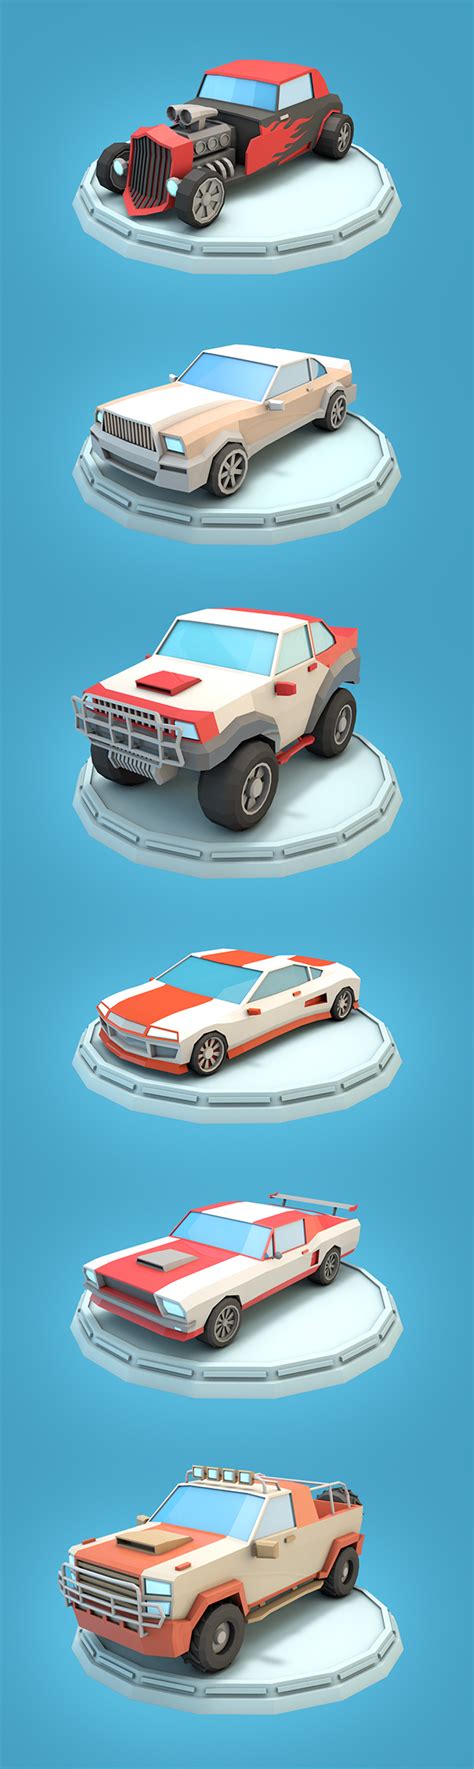 Low Poly Cars On Behance